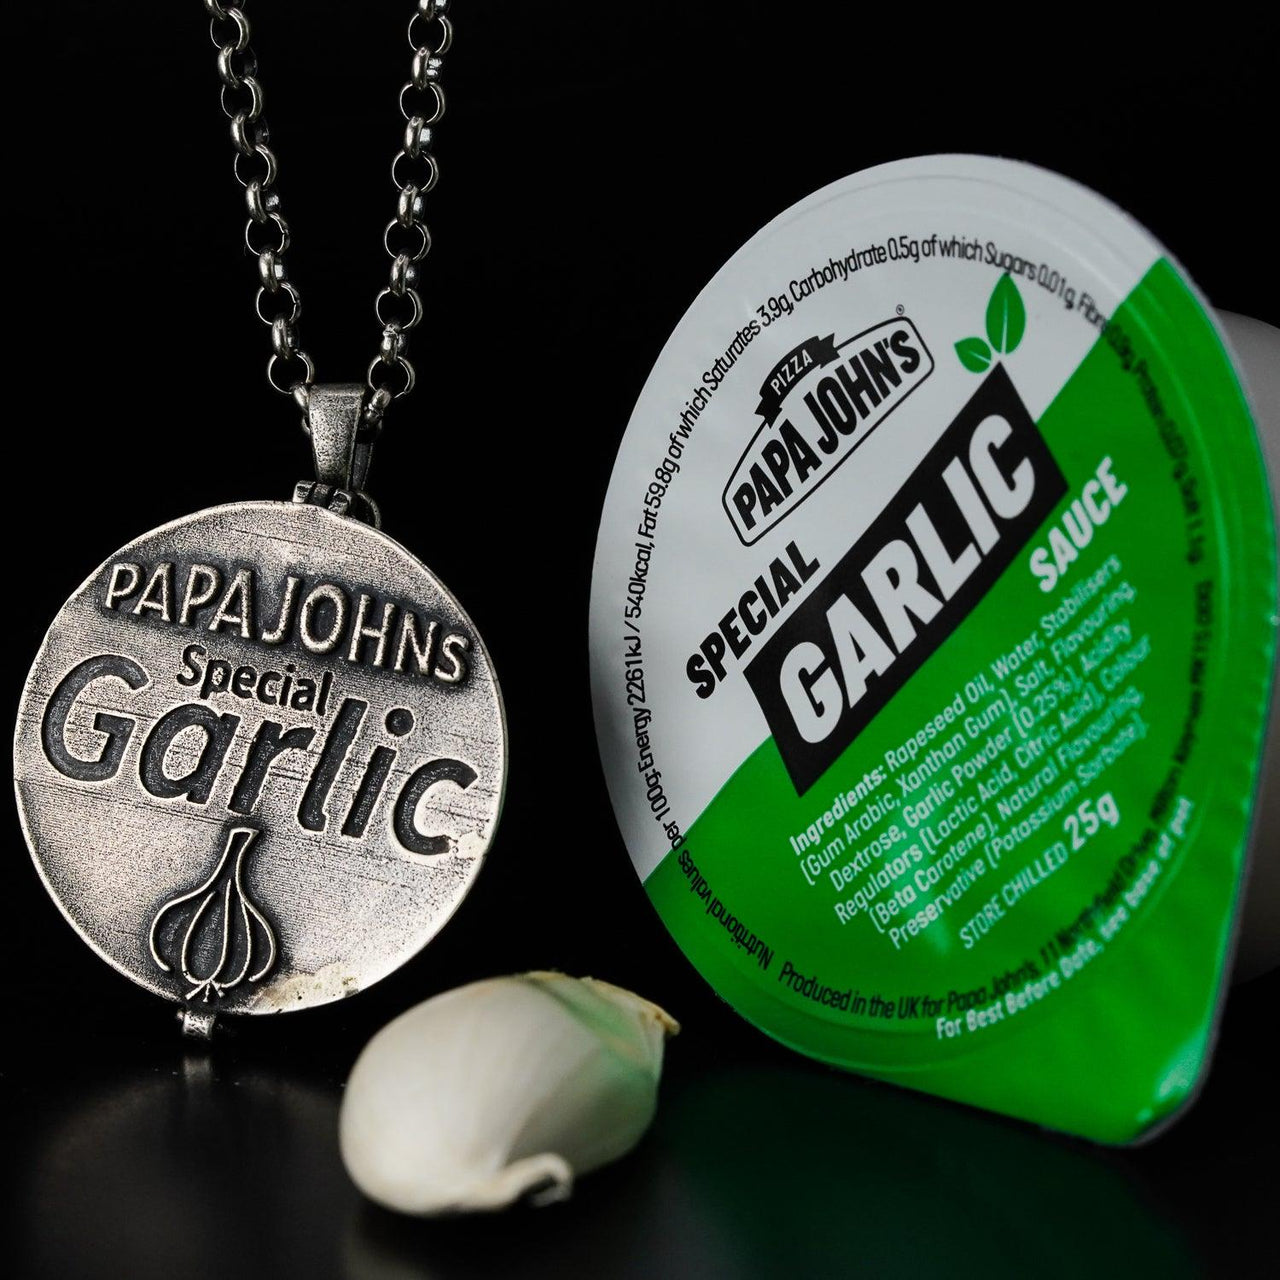 Stranger Bling Pendant next to Papa Johns Special Garlic Sauce made by Black Feather Design